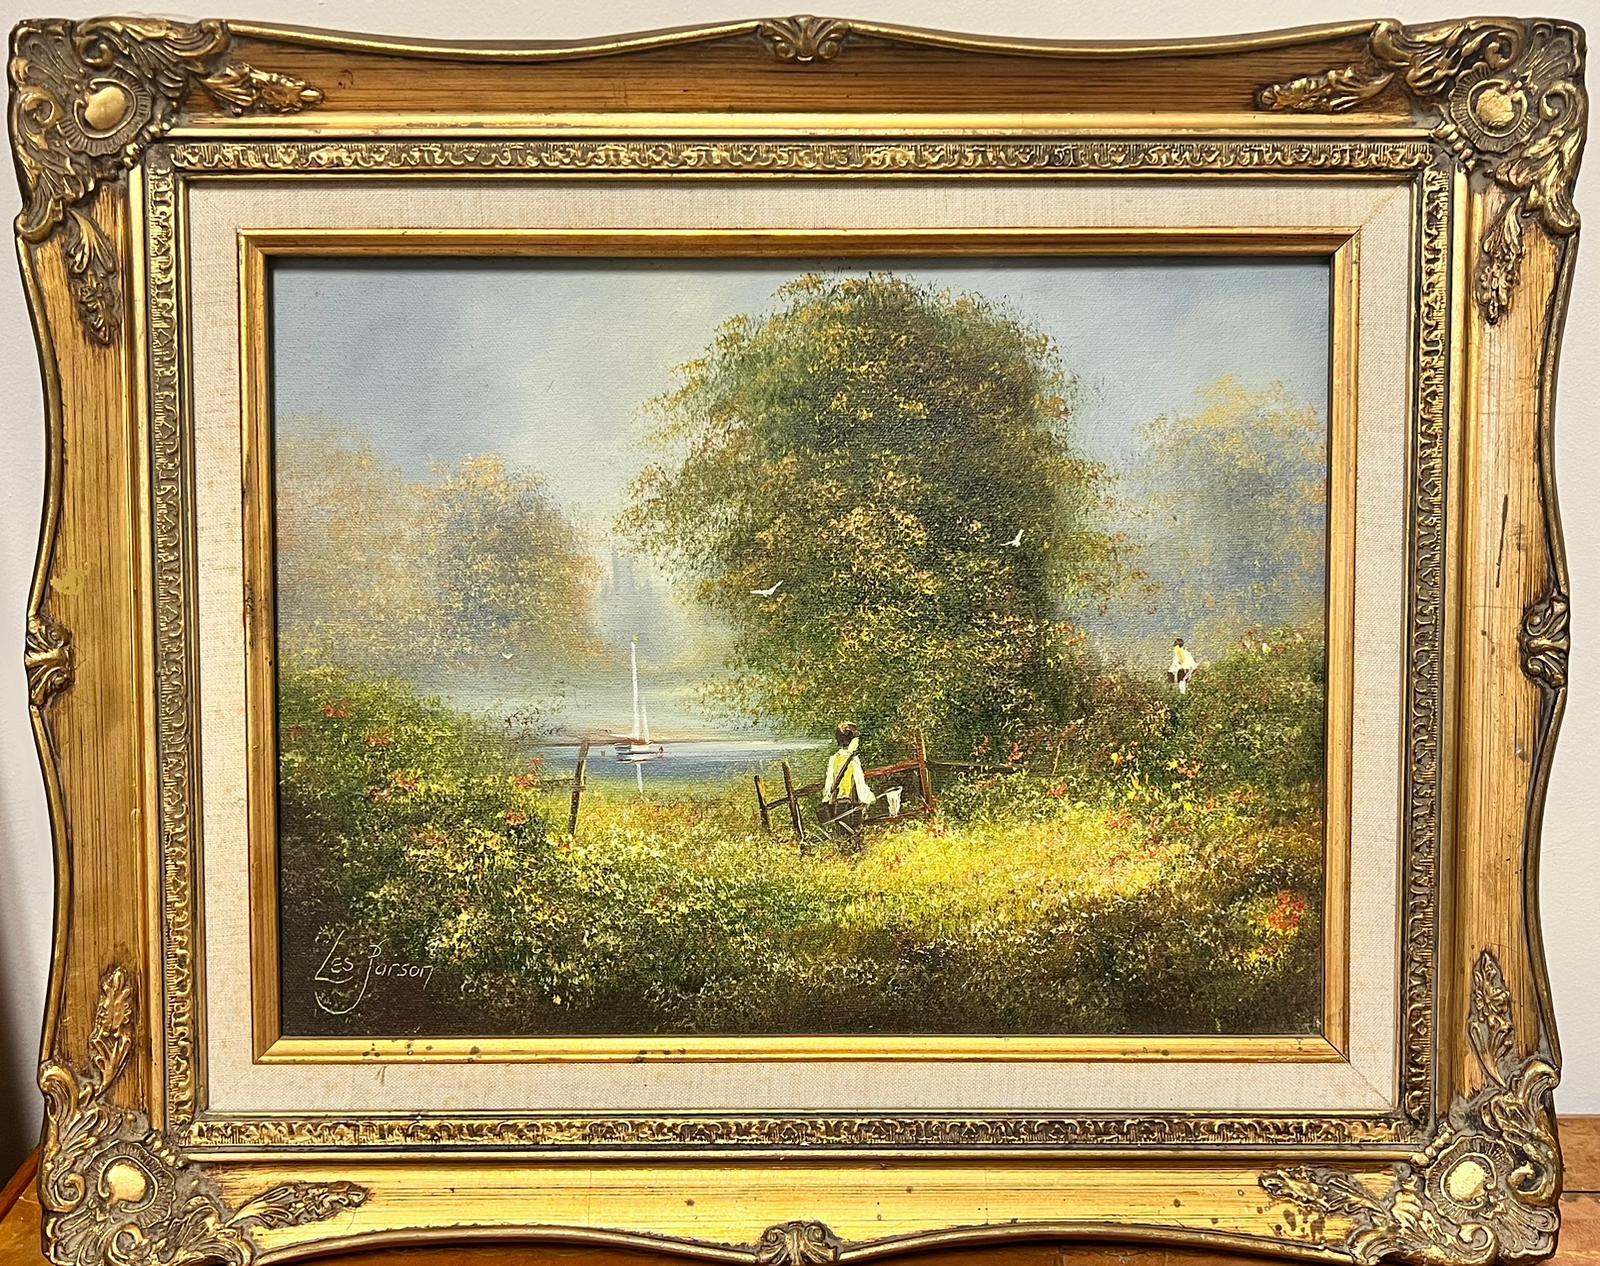 Les Parsons Figurative Painting - Hazy Summer Meadow Children with Fishing Nets by River Signed English Oil